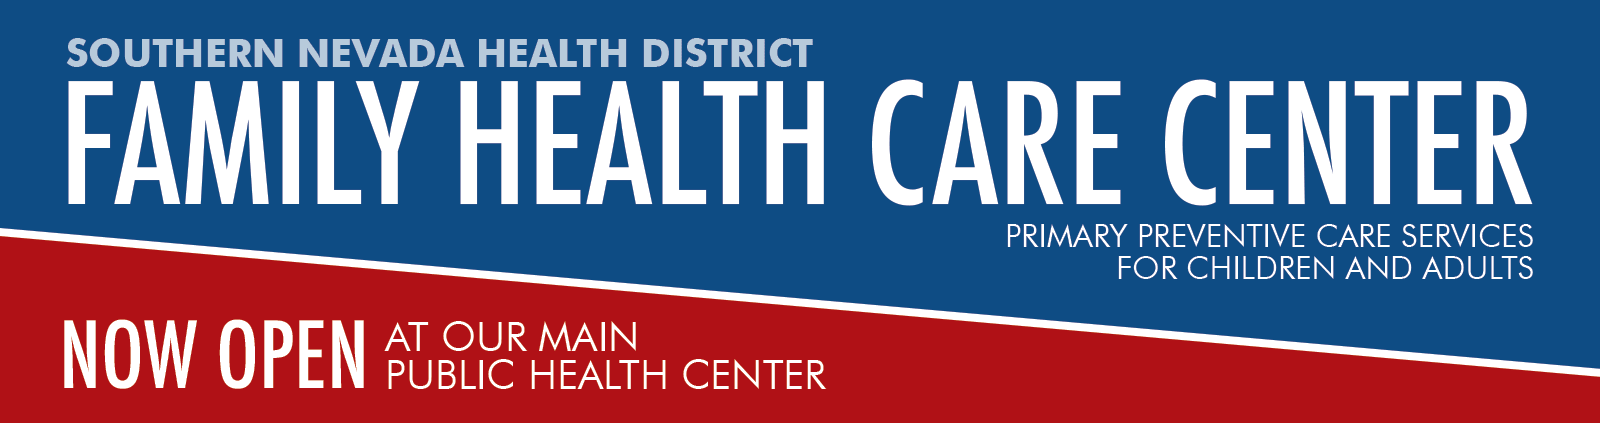 Family Health Care Center -Primary preventative care services for children and adults. NOW OPEN at our main public health center.